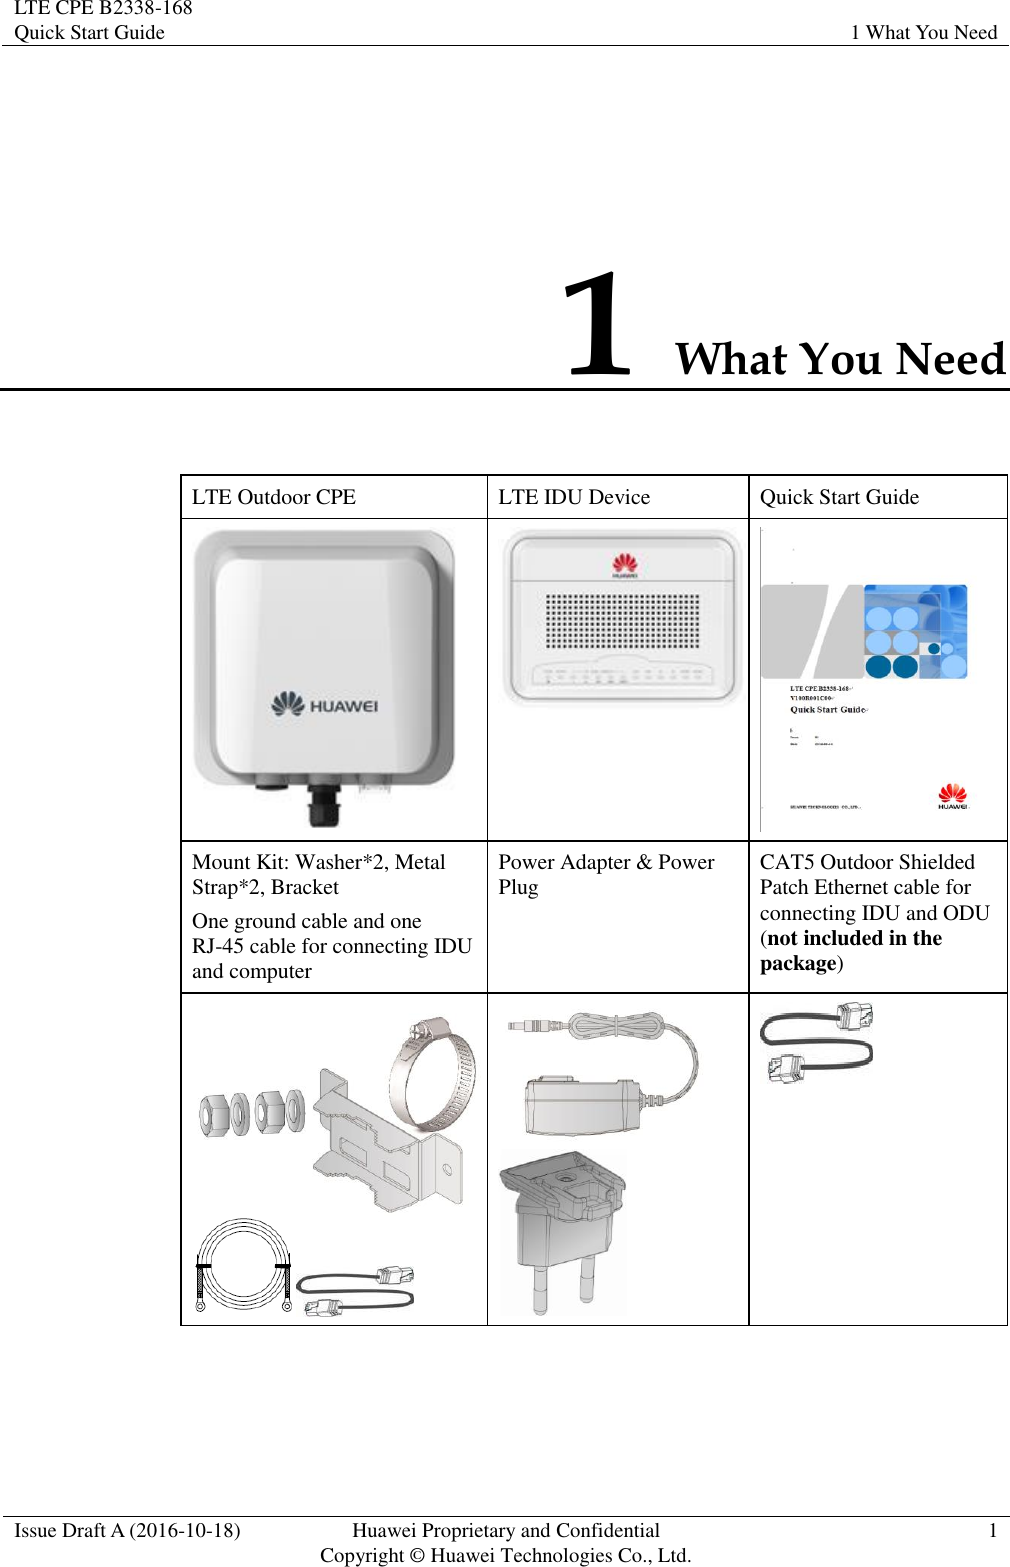 LTE CPE B2338-168   Quick Start Guide 1 What You Need  Issue Draft A (2016-10-18) Huawei Proprietary and Confidential                                     Copyright ©  Huawei Technologies Co., Ltd. 1  1 What You Need LTE Outdoor CPE LTE IDU Device Quick Start Guide    Mount Kit: Washer*2, Metal Strap*2, Bracket One ground cable and one RJ-45 cable for connecting IDU and computer Power Adapter &amp; Power Plug CAT5 Outdoor Shielded Patch Ethernet cable for connecting IDU and ODU (not included in the package)     